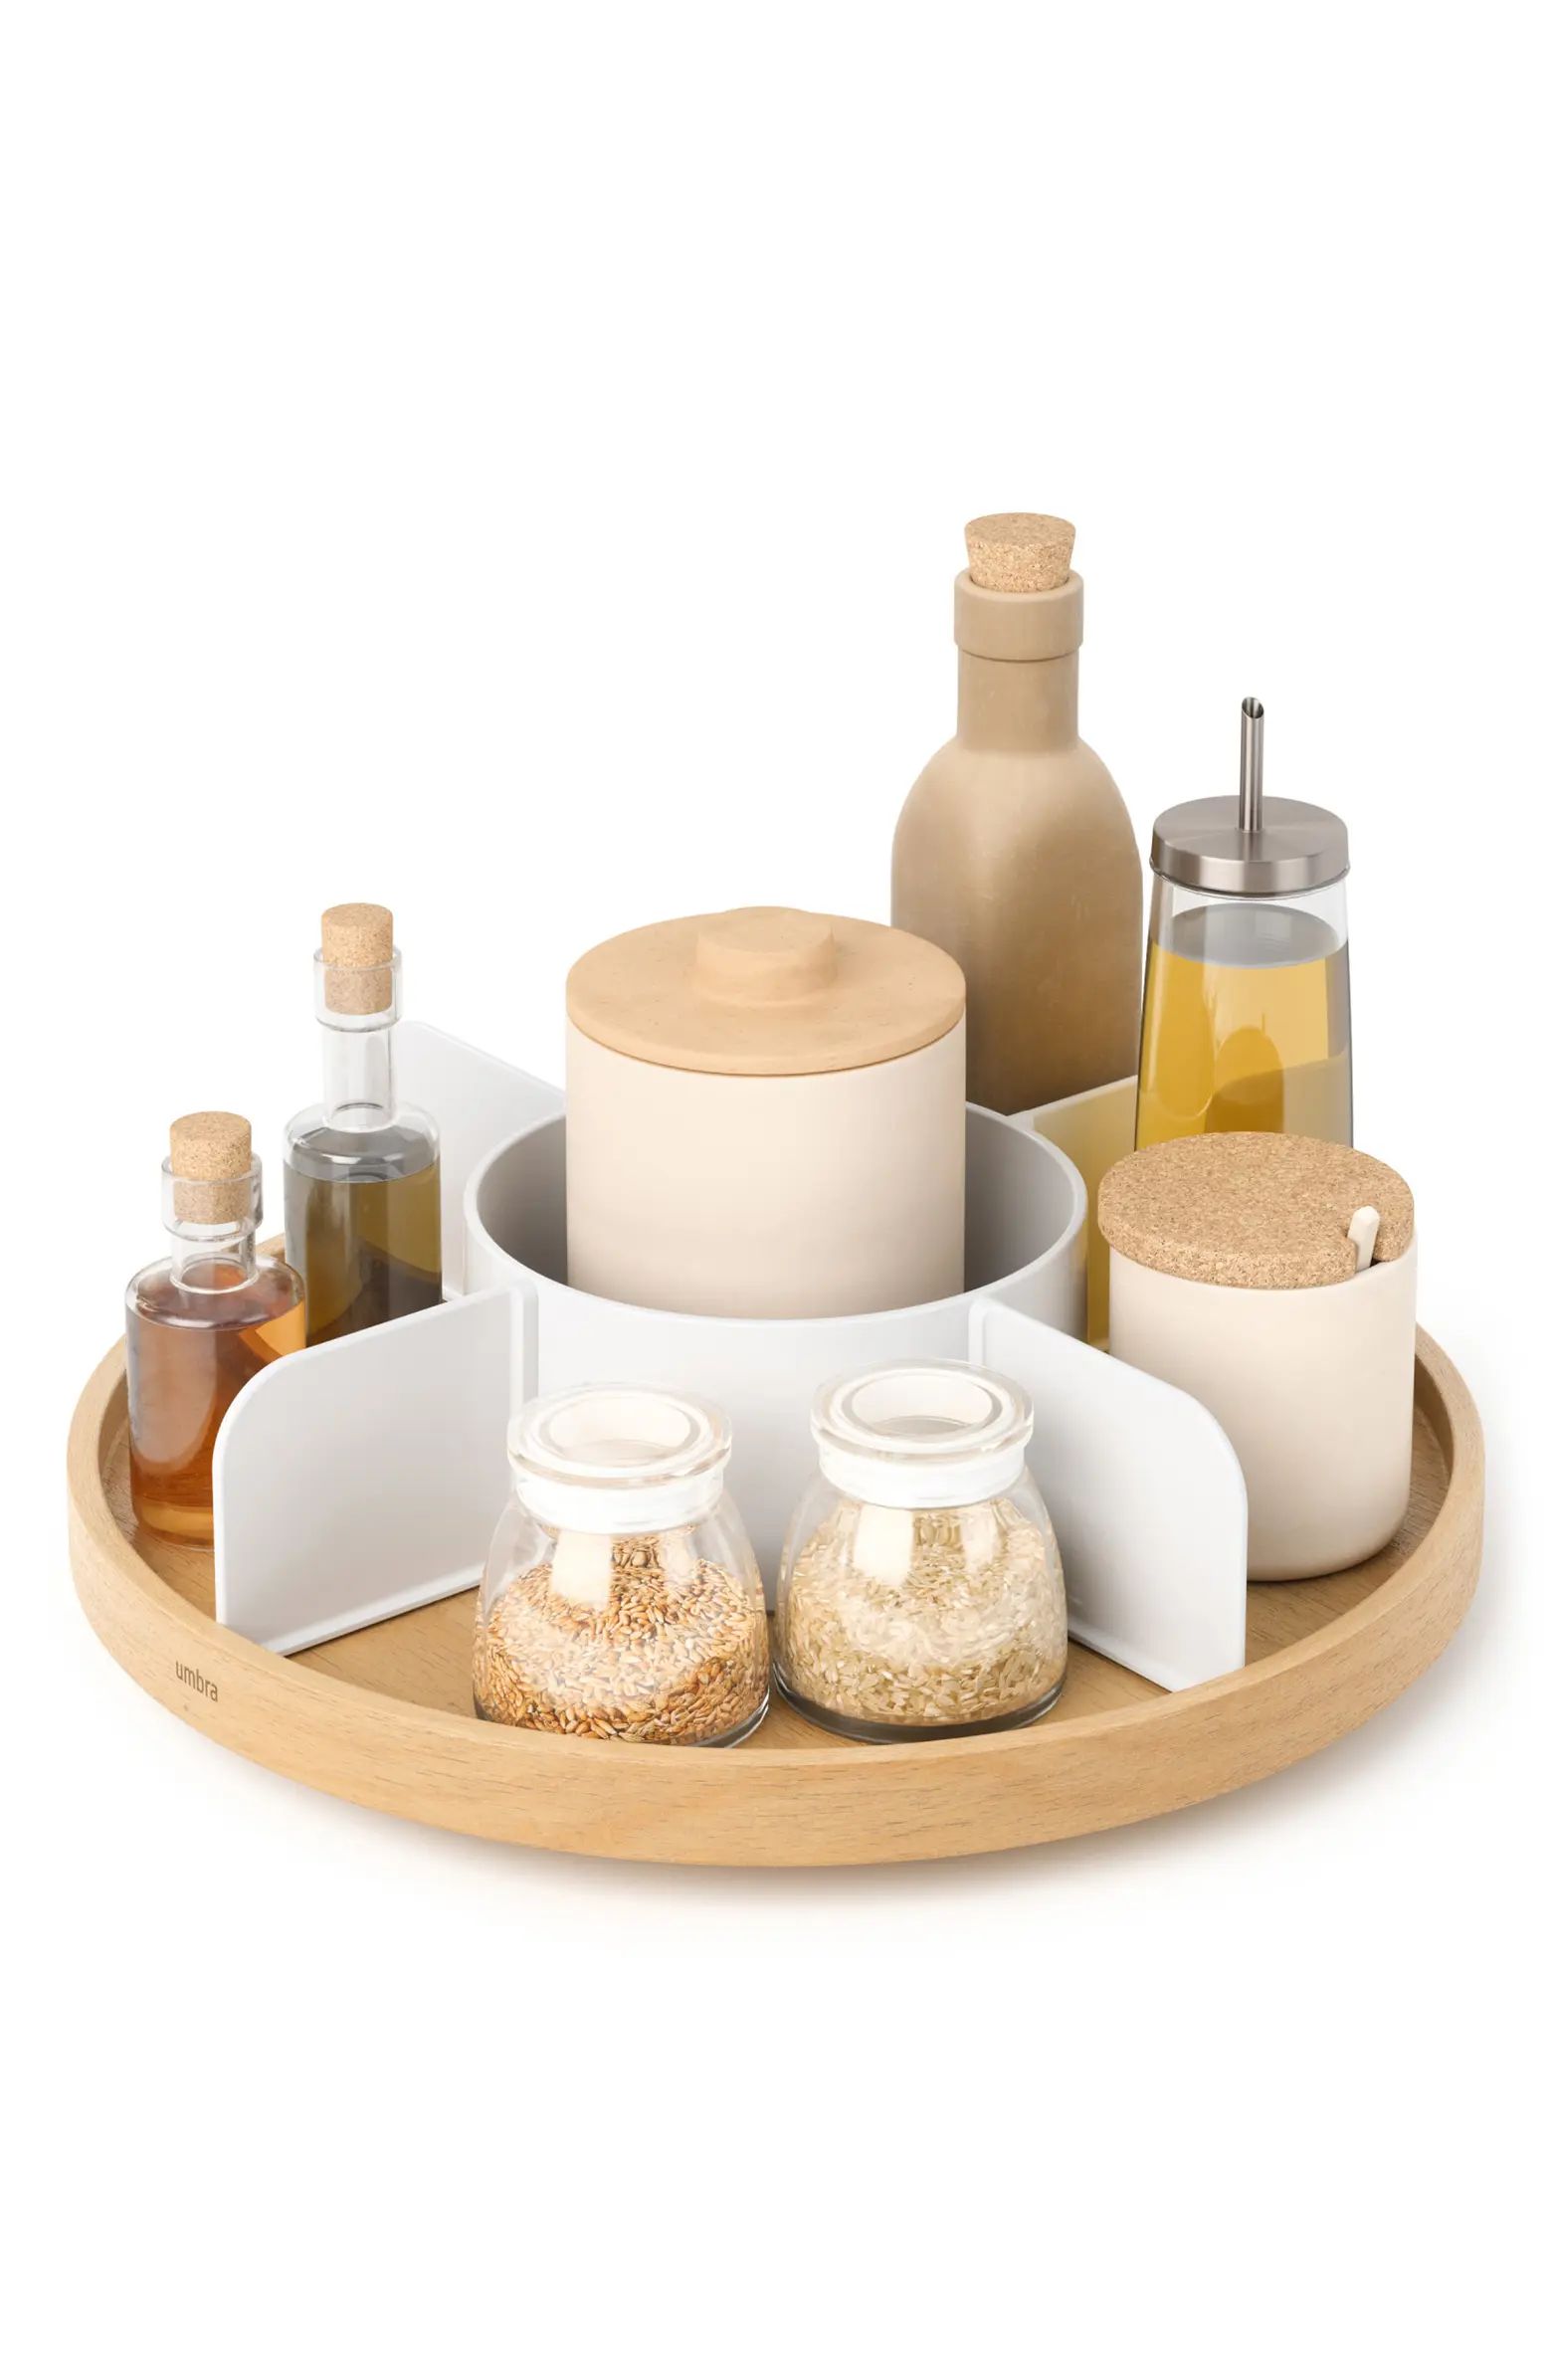 Bellwood Lazy Susan Divided Storage Tray | Nordstrom Rack